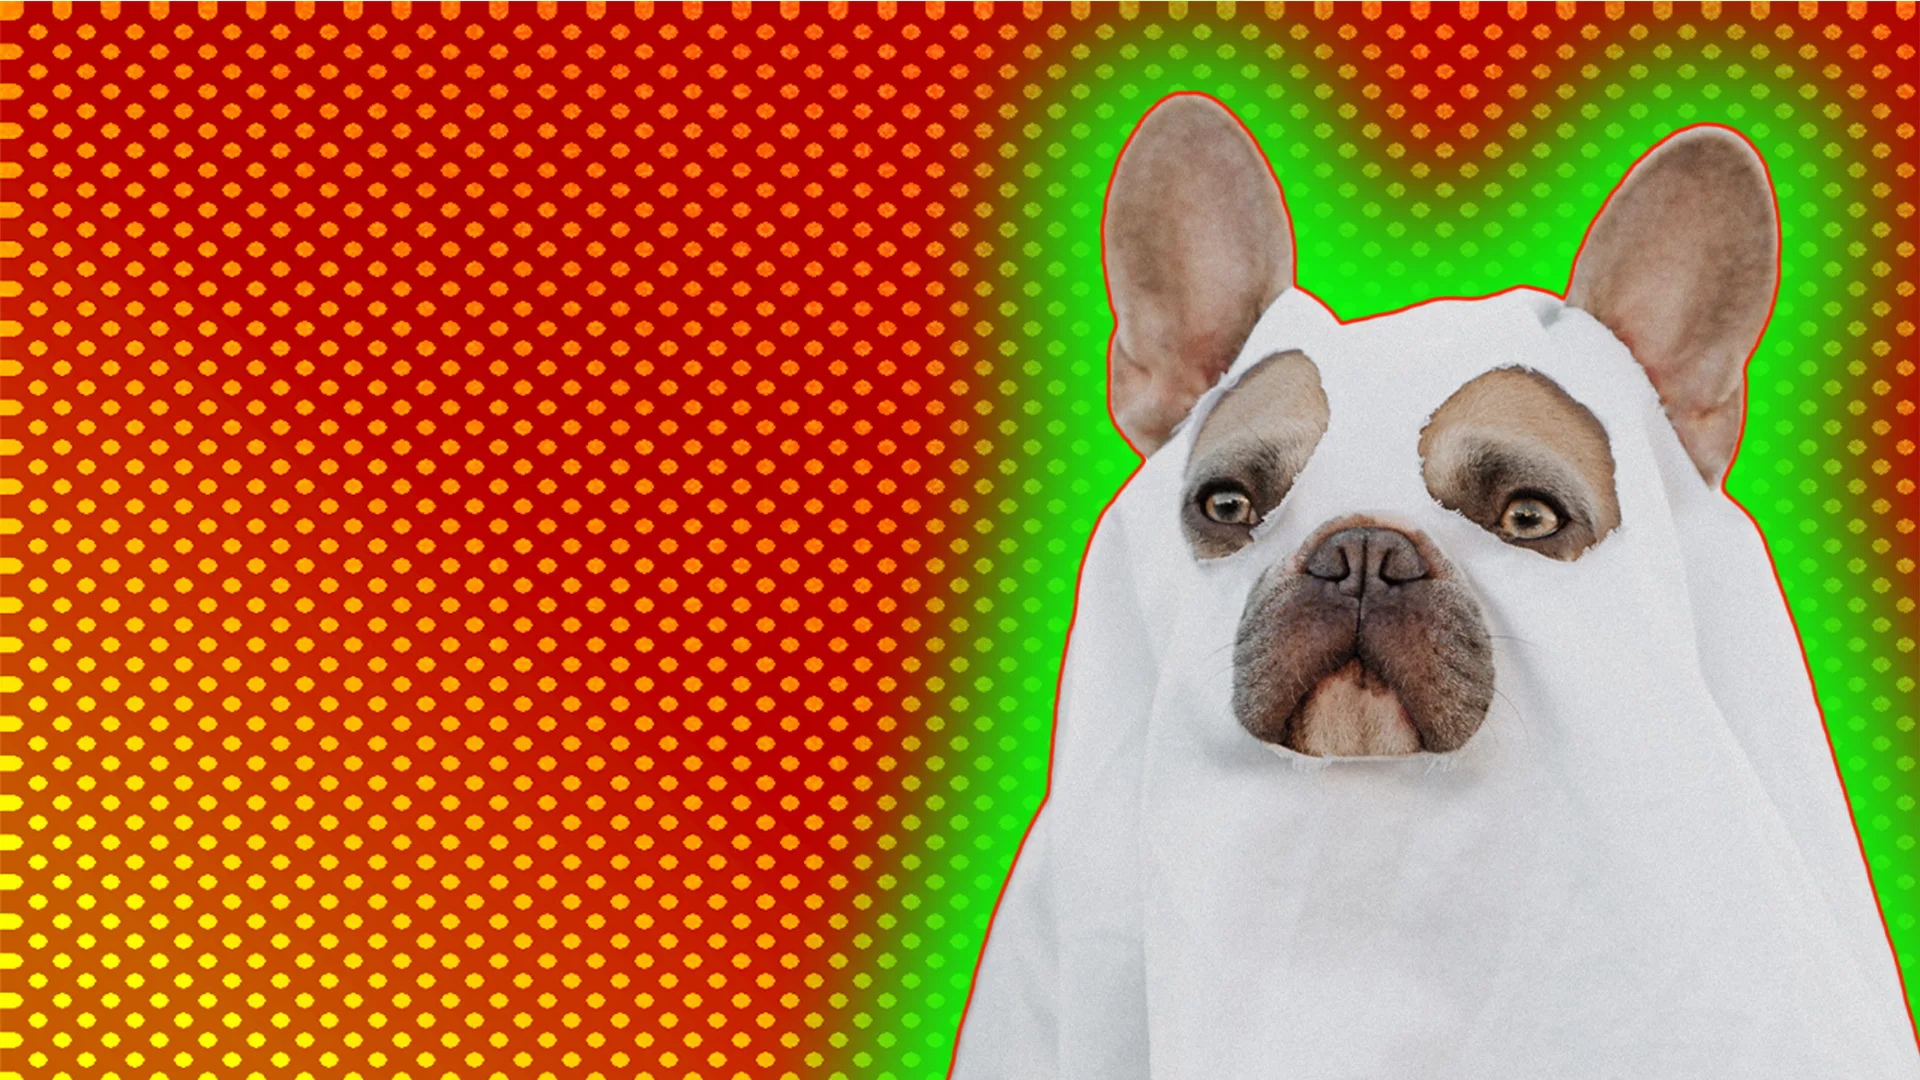 Brown Bulldog wearing ghost costume, outlined by light green halo effect on red-dotted background.